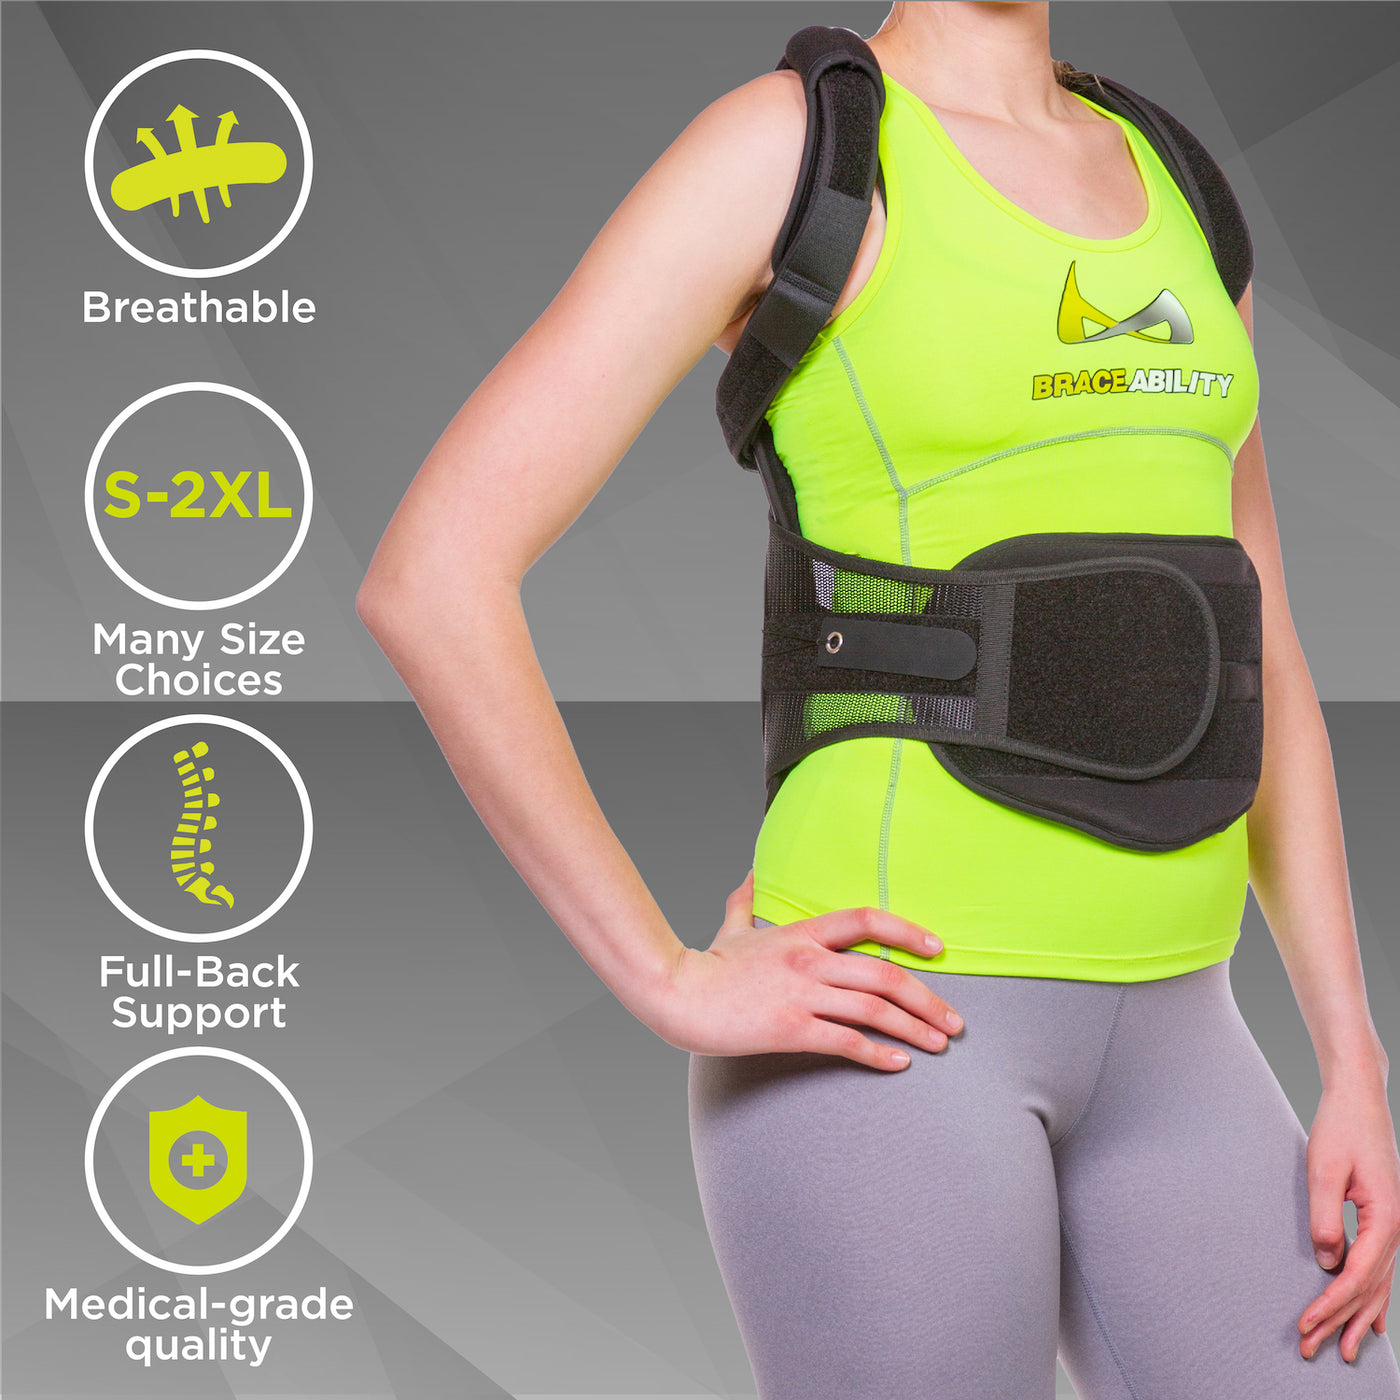 Featuring breathable material, the full-back support helps correct posture by straightening spine